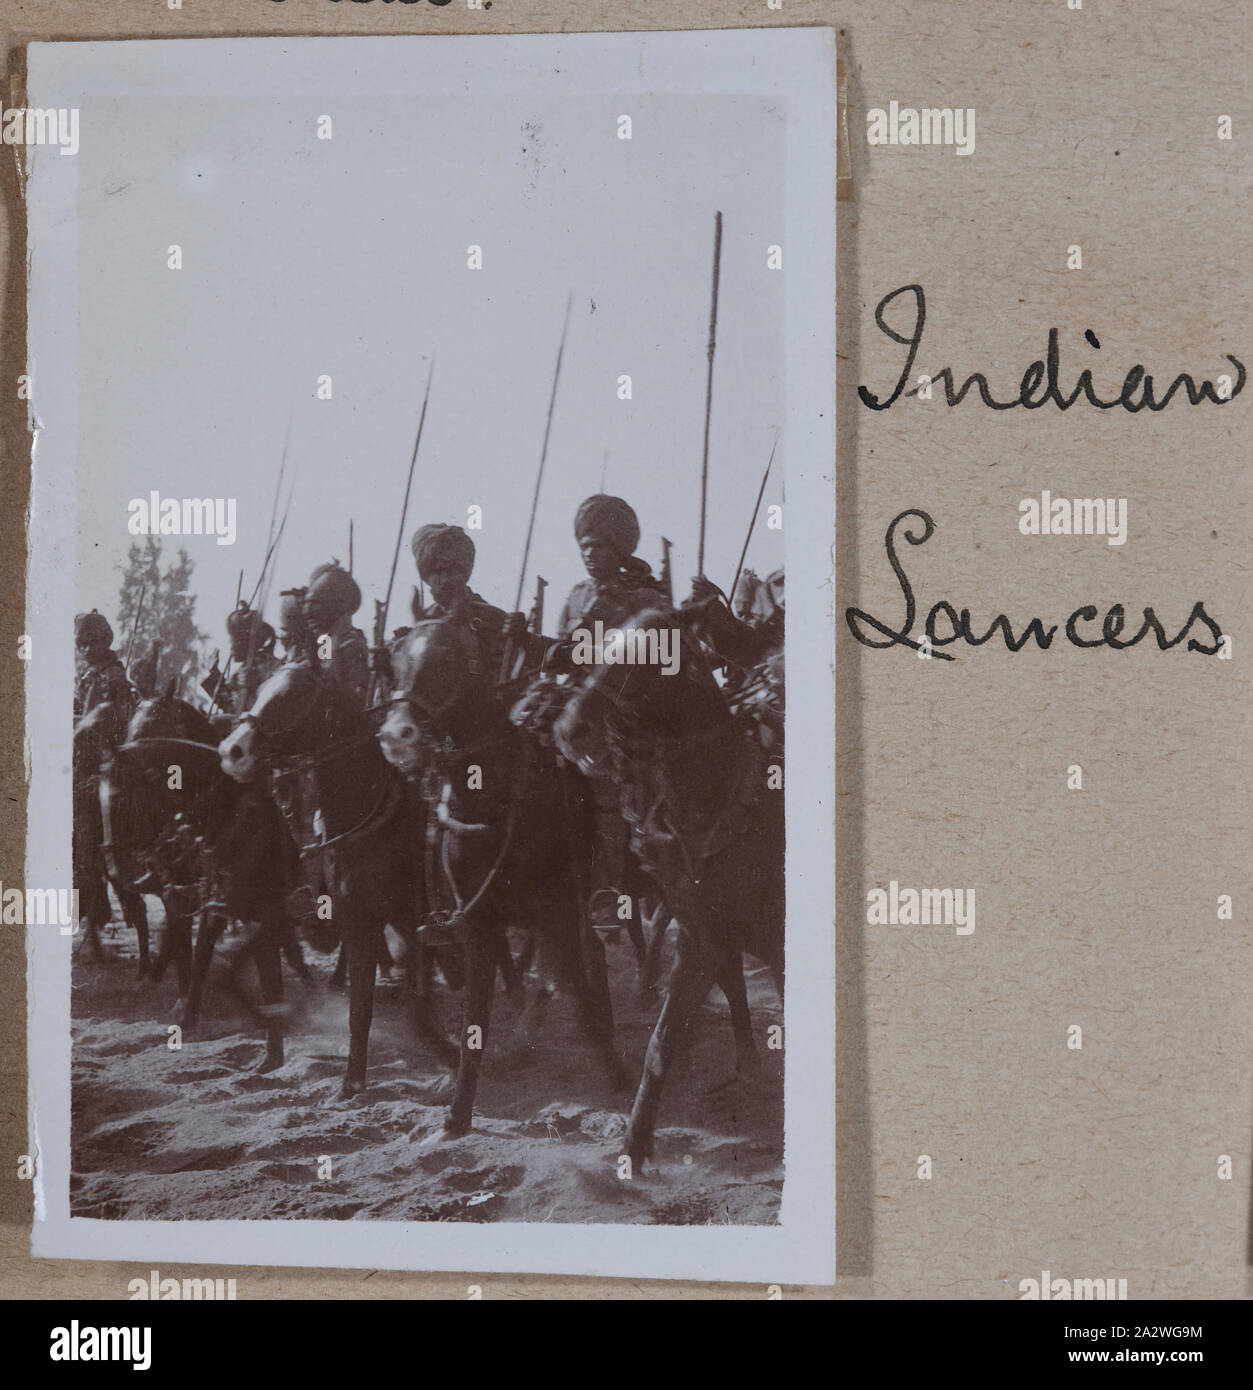 Photograph - 'Indian Lancers', Egypt, Captain Edward Albert McKenna, World War I, 1914-1915, One of 139 photographs in an album from World War I likely to have been taken by Captain Edward Albert McKenna. The photographs include the 7th Battalion training in Mena Camp, Egypt, and sight-seeing. Image depicting mounted Indian lancers Stock Photo